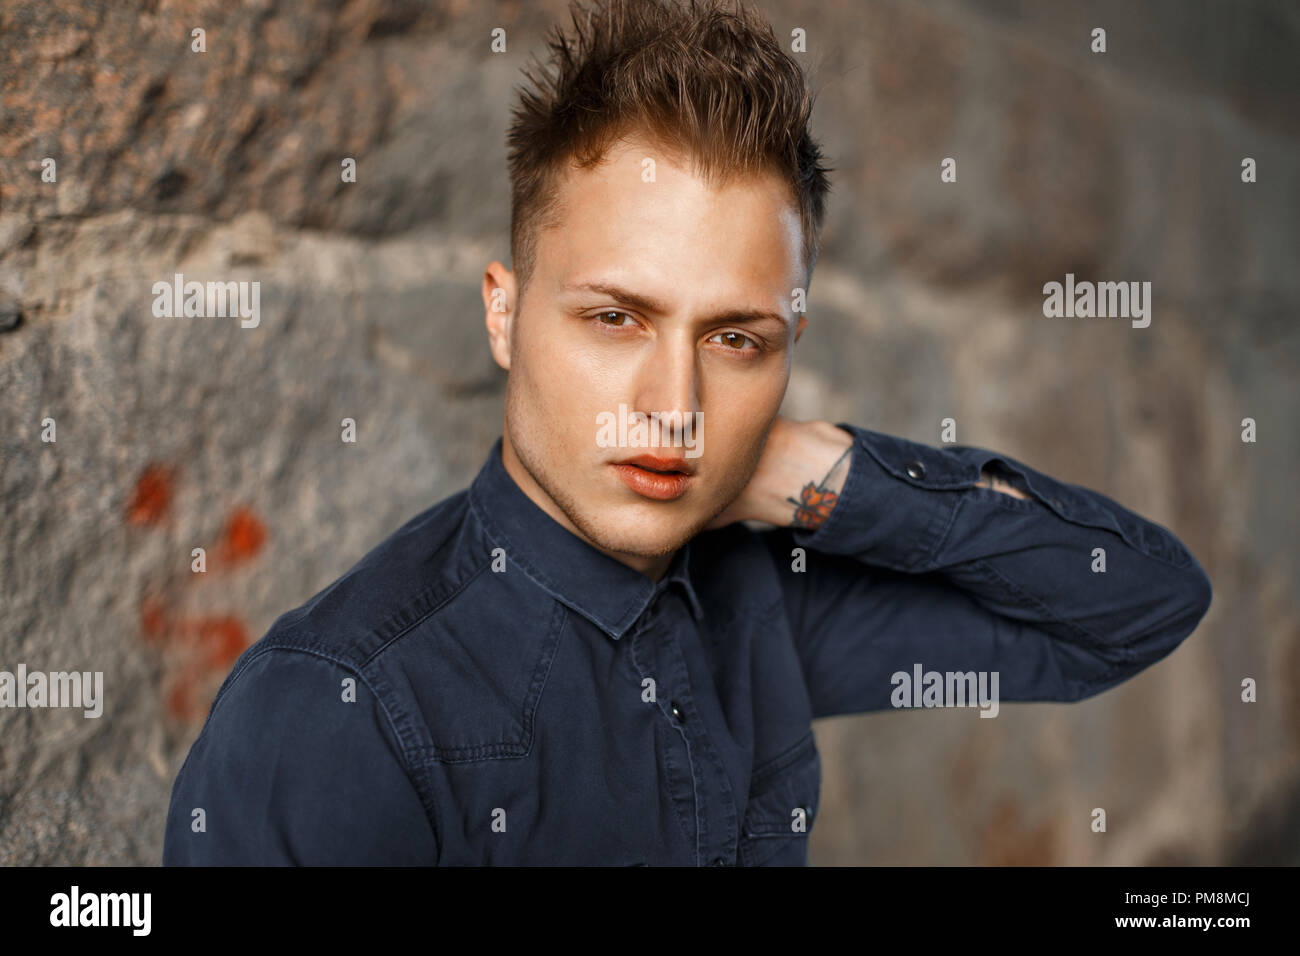 Close-up portrait of a handsome young man in a blue shirt near a stone wall Stock Photo